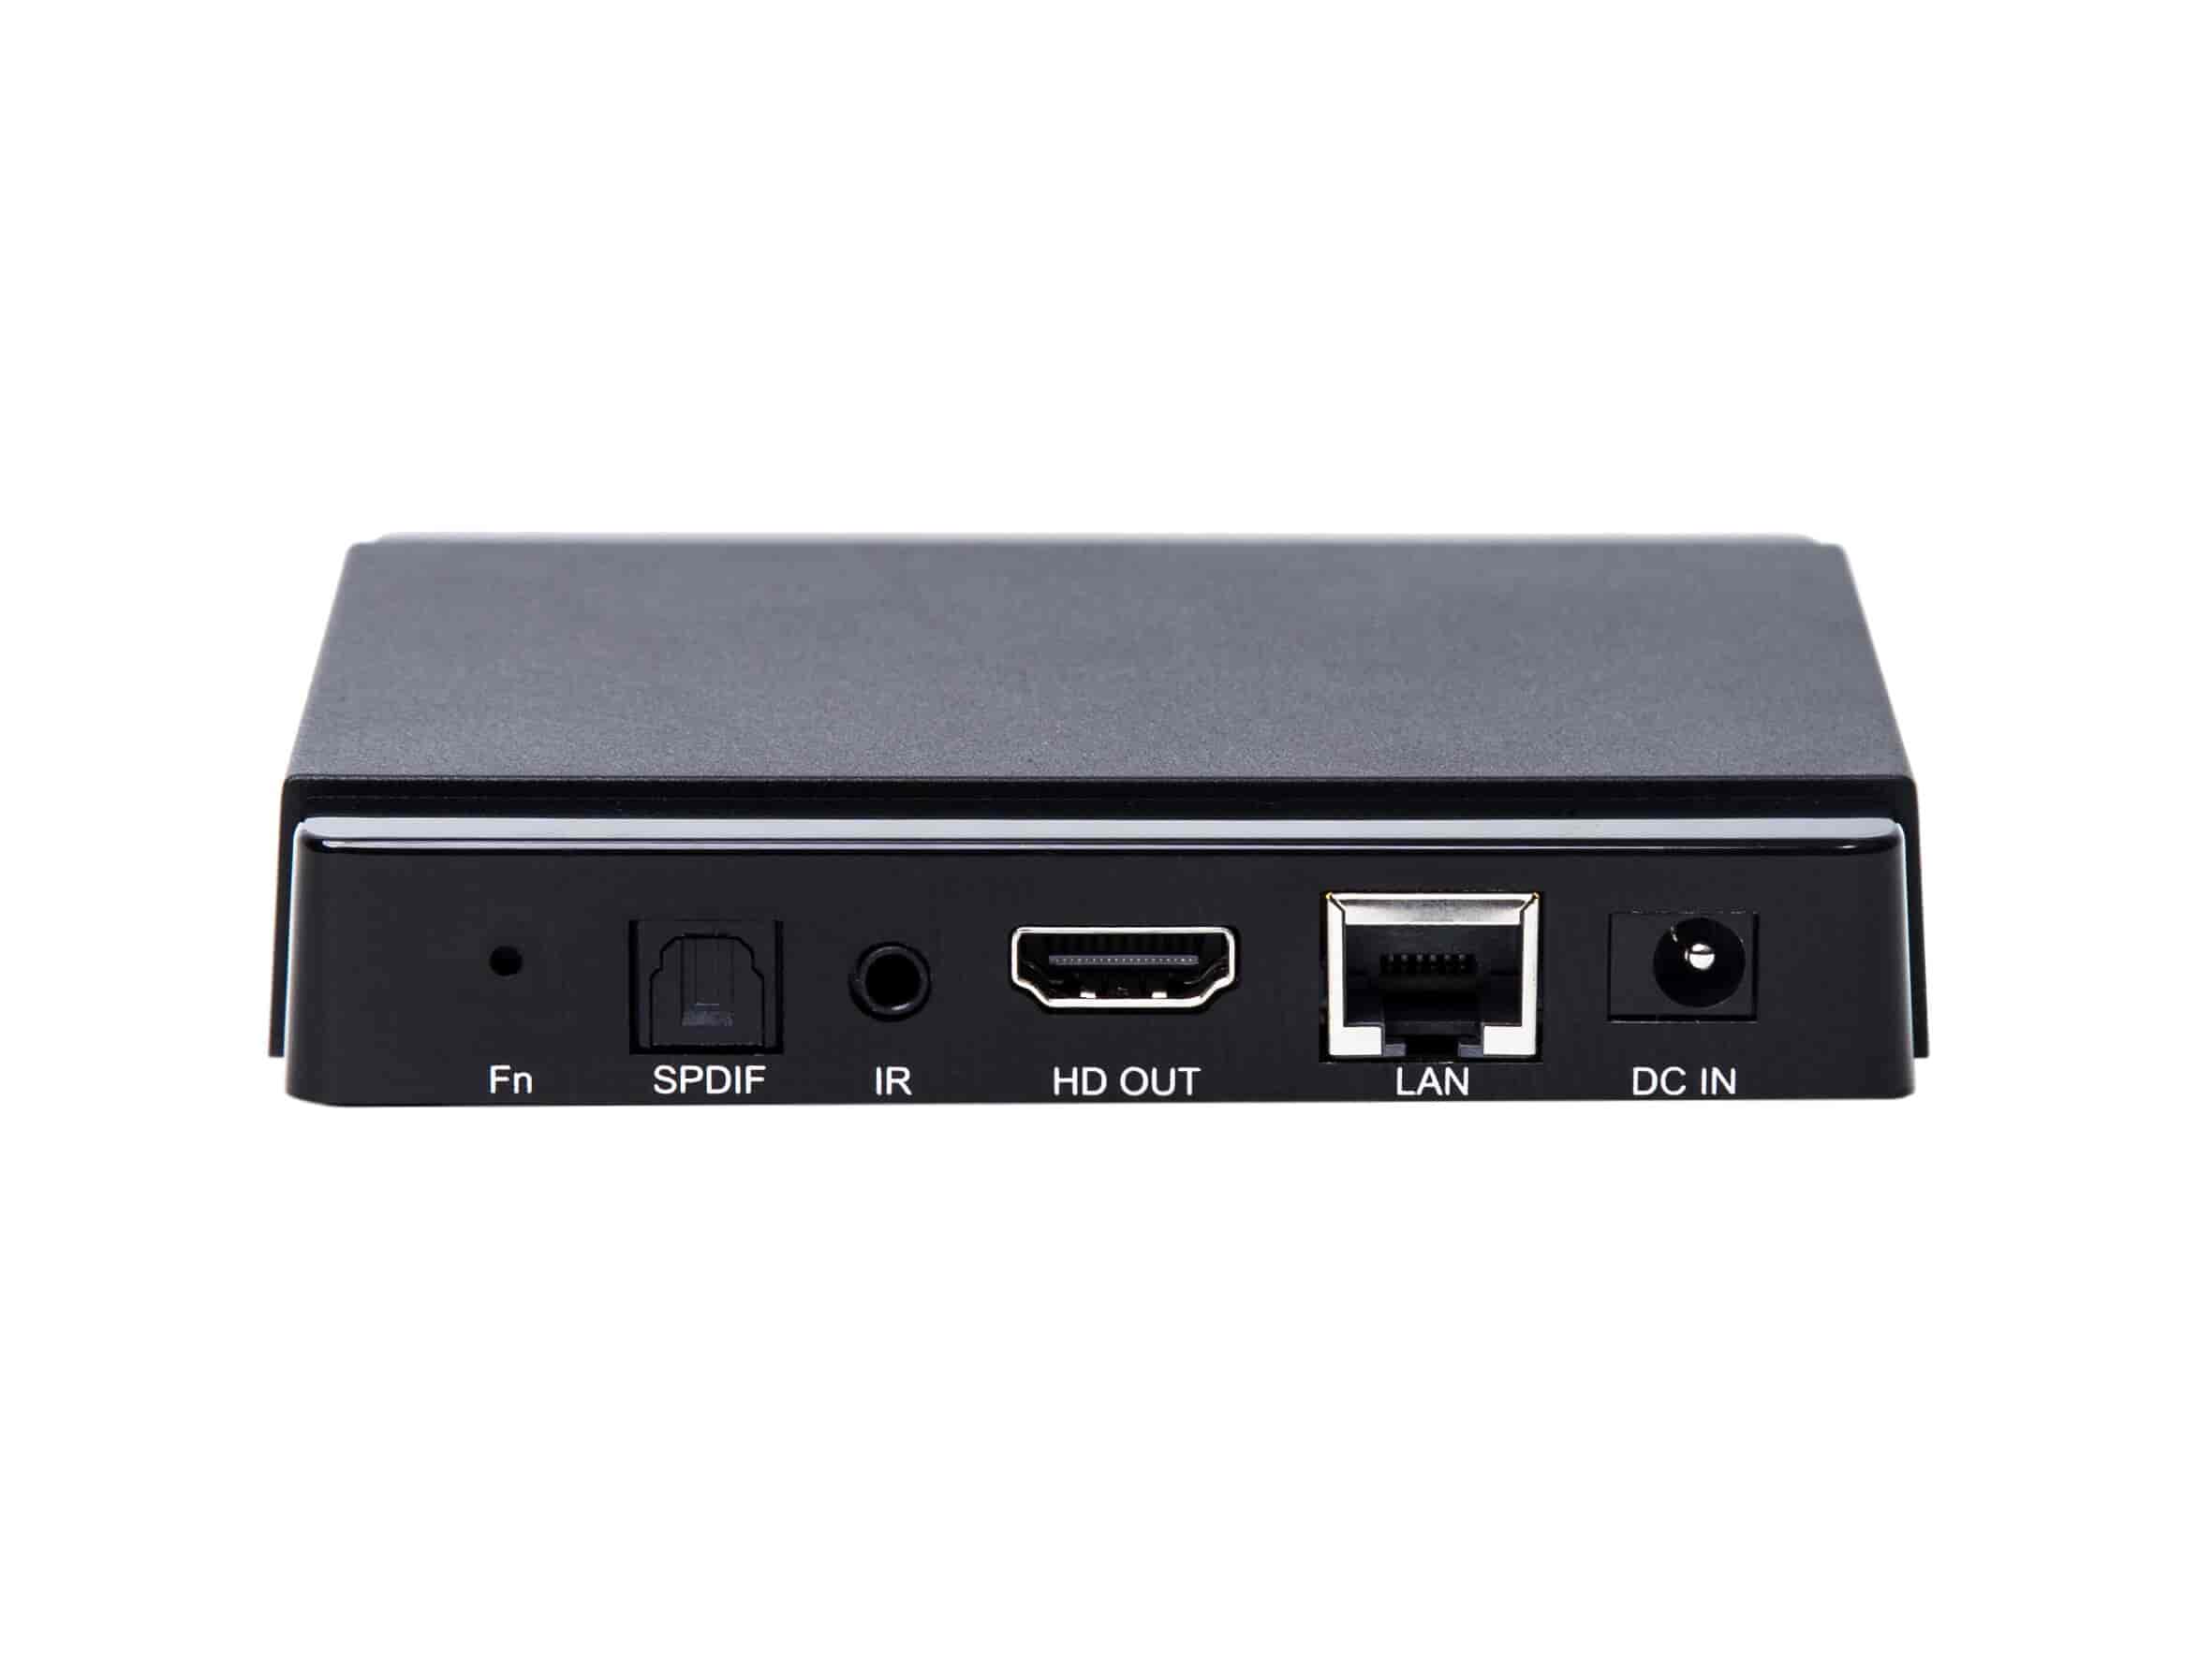 Qviart OGA - Android TV box IPTV multimediaboxQviart OGA is a new strong Android TV box that can withstand comparison with other High End IPTV boxes - but at an absolutely fair price. Here you get voice-controlled remote control, Dual band WiFi, 4K/8K, USB 3.0, Bluetooth 5.1 and much more. 2GB DDR4 and 16GB Flash provide plenty of options for installing your favorite apps. Everything is operated via a nice remote control with good response and voice control. Qviart OGA is both fast and easy to operate, with the power to handle even the most demanding services. Comes preloaded with the well-known QTV app, which makes it easy to connect to any IPTV service. Experience TV in a better way.QVIART LUNIX